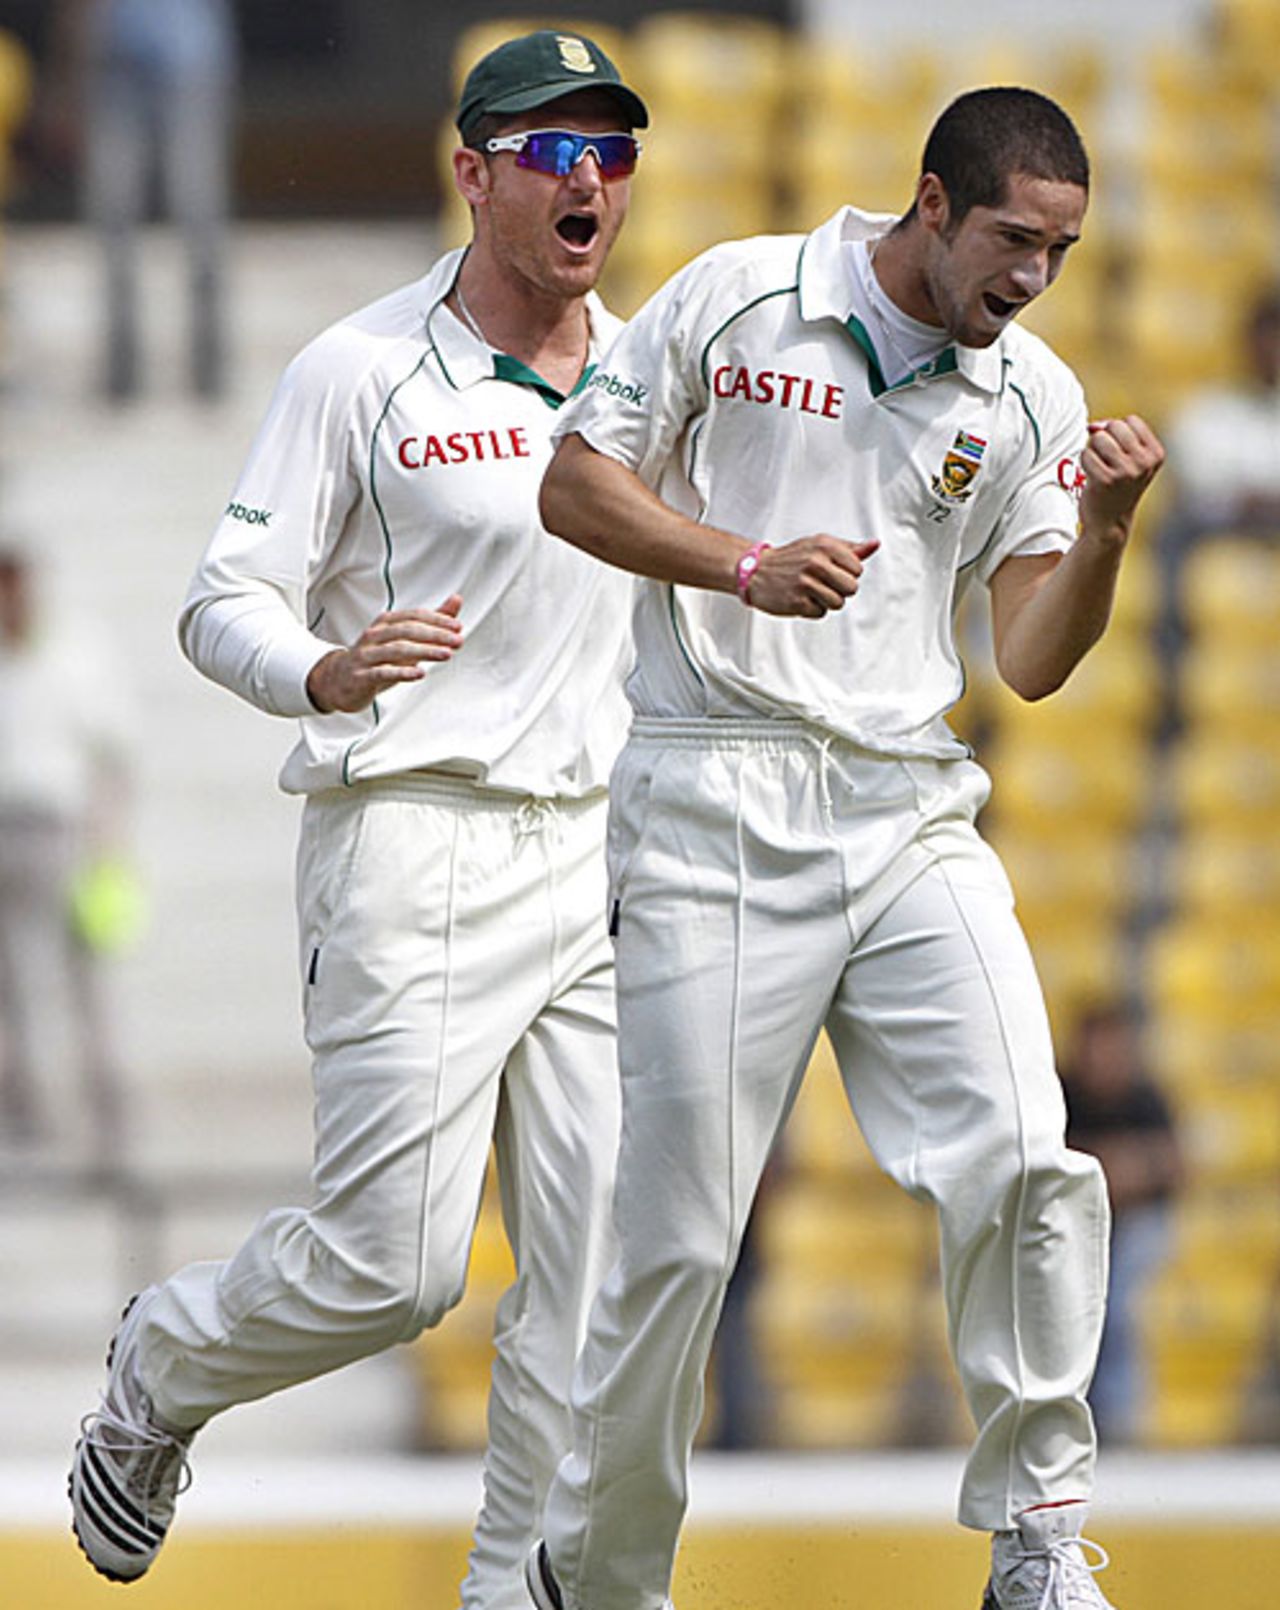 Wayne Parnell celebrates after trapping S Badrinath, India v South Africa, 1st Test, Nagpur, 4th day, February 9, 2010